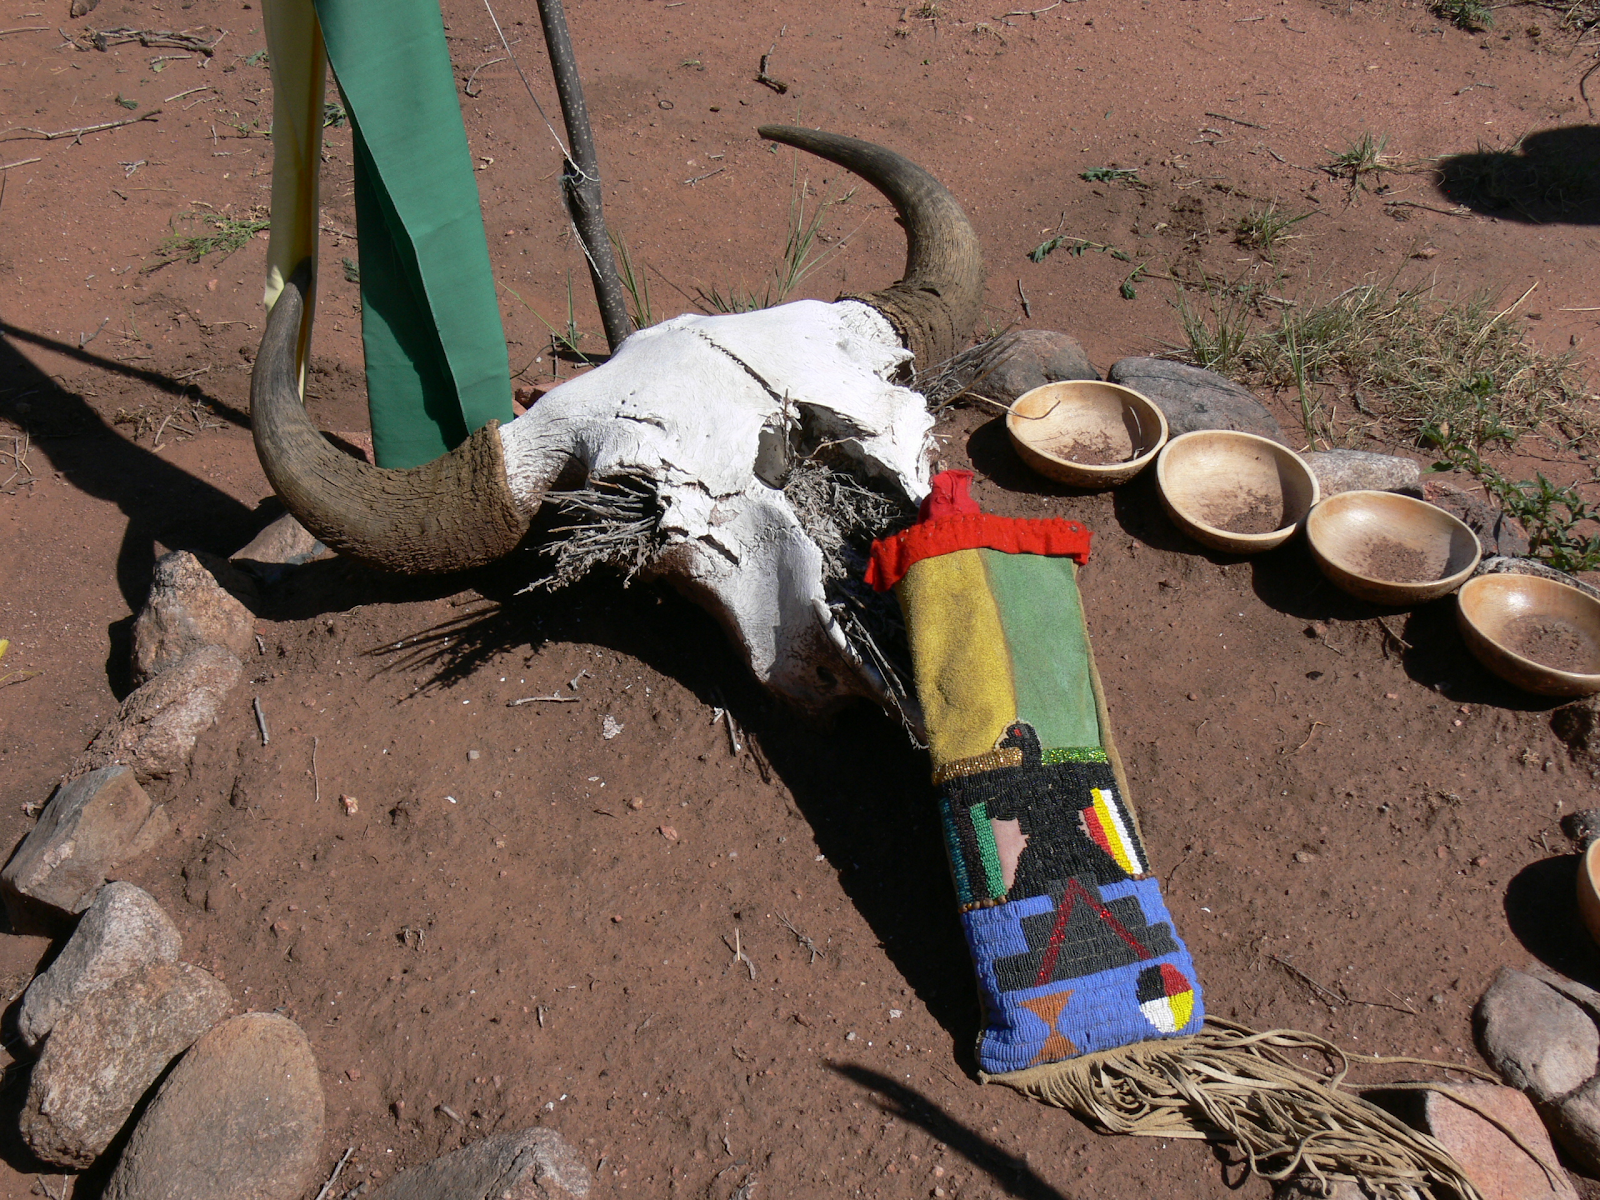 Image of a cow's skull and other items placed inside a circle of stones